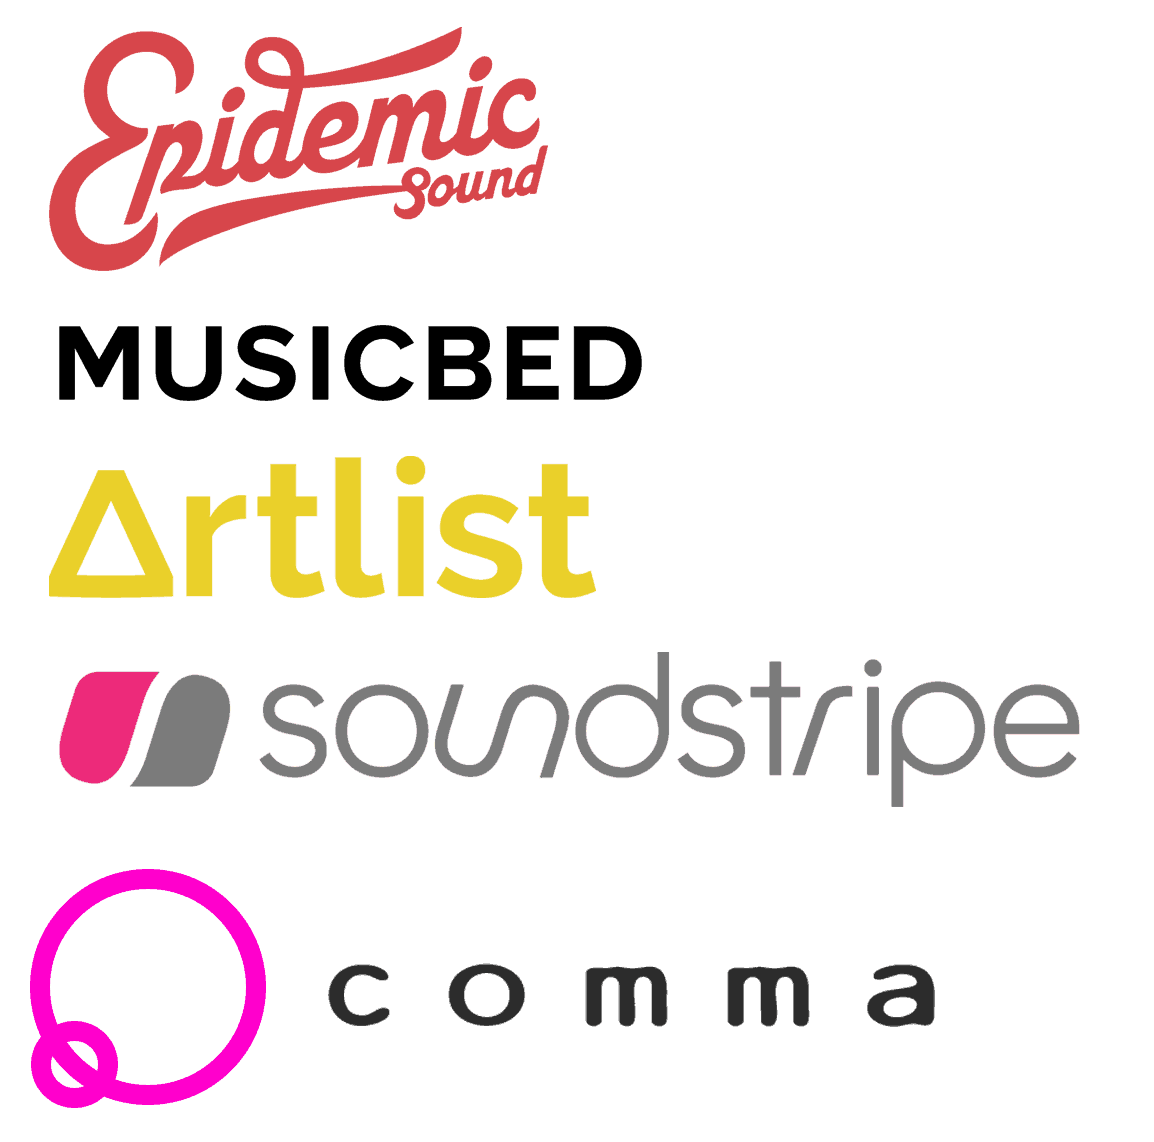 Epidemic sounds music. Musicbed. Артлист. Epidemic Sound. Epidemic Sound Music.